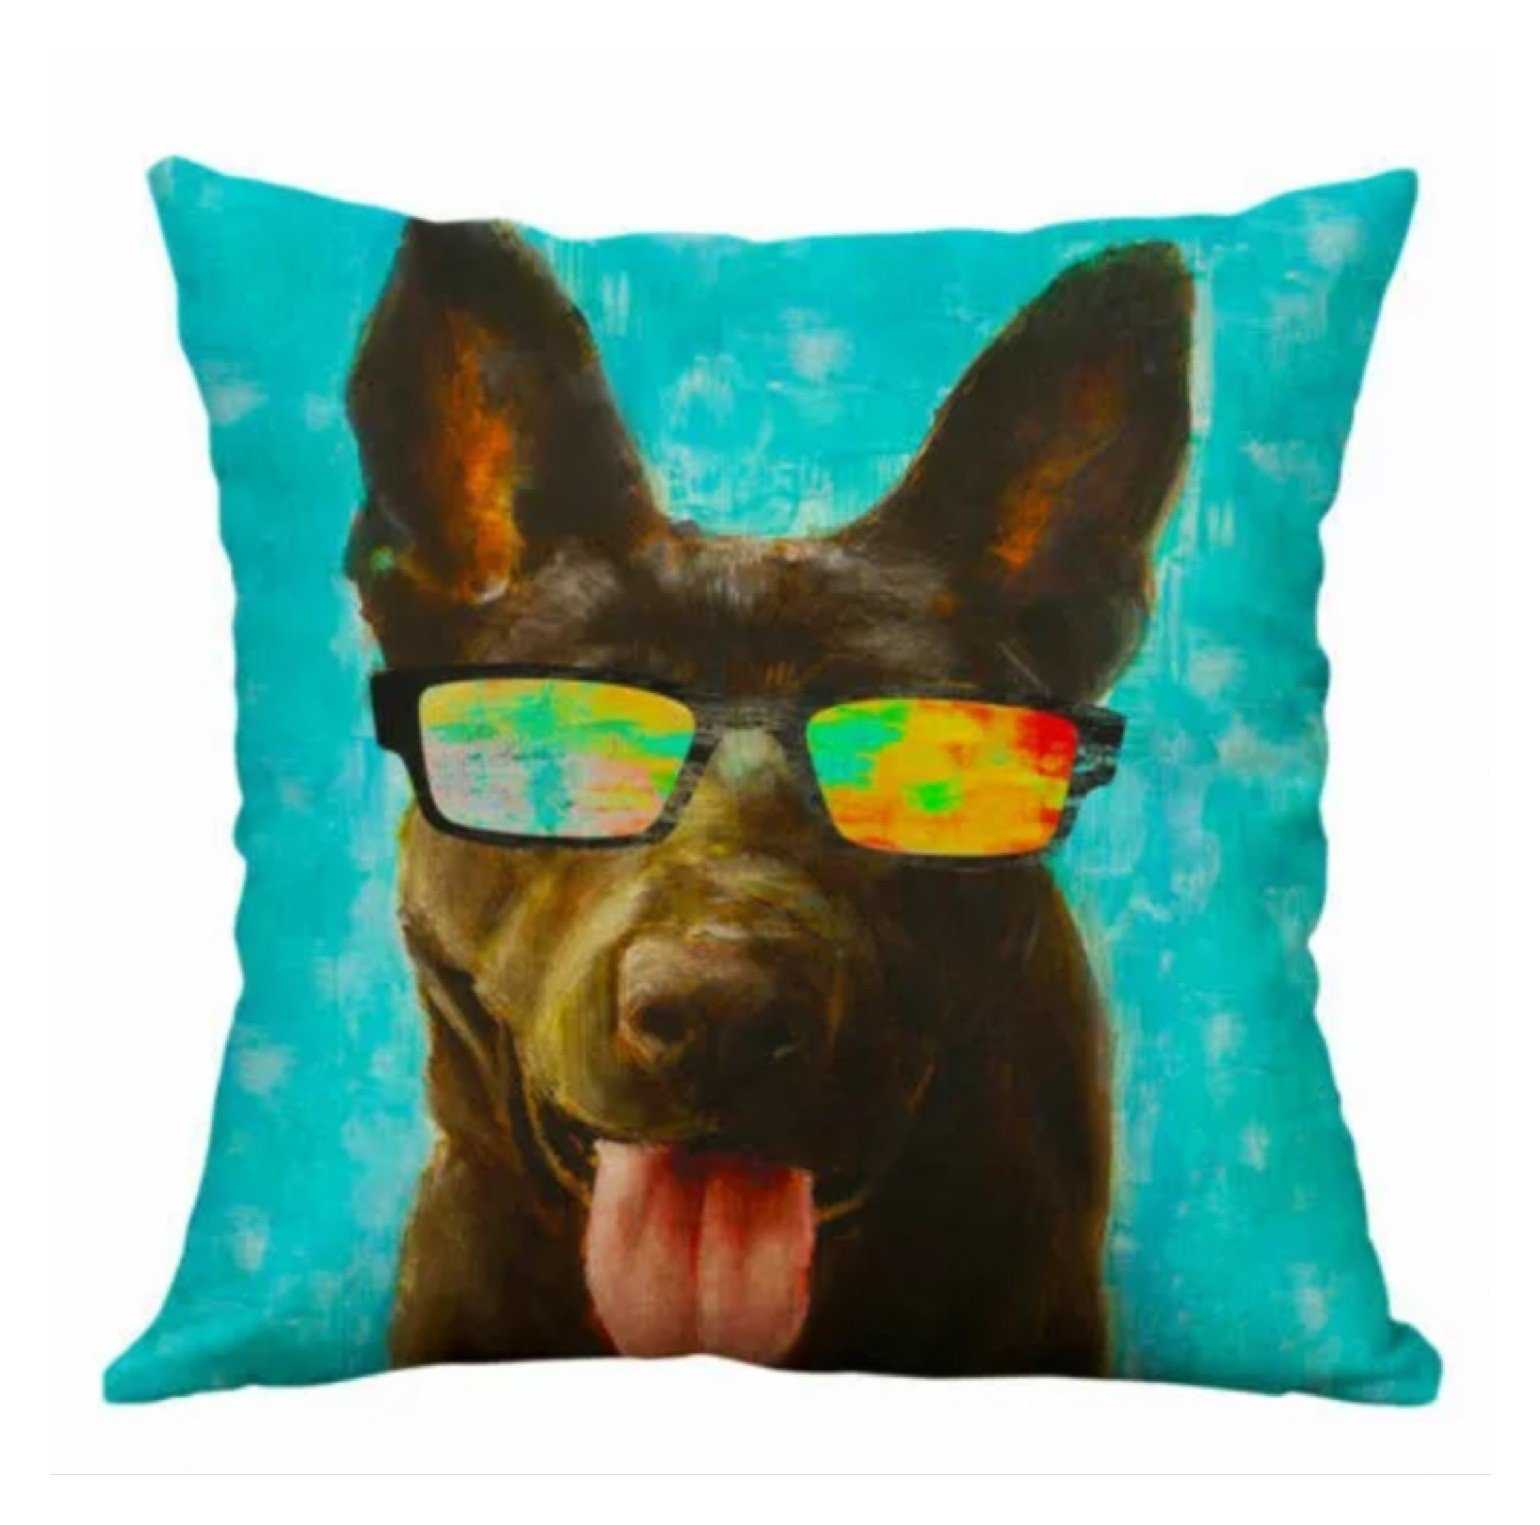 Cushion Pillow Dog Funky with Glasses